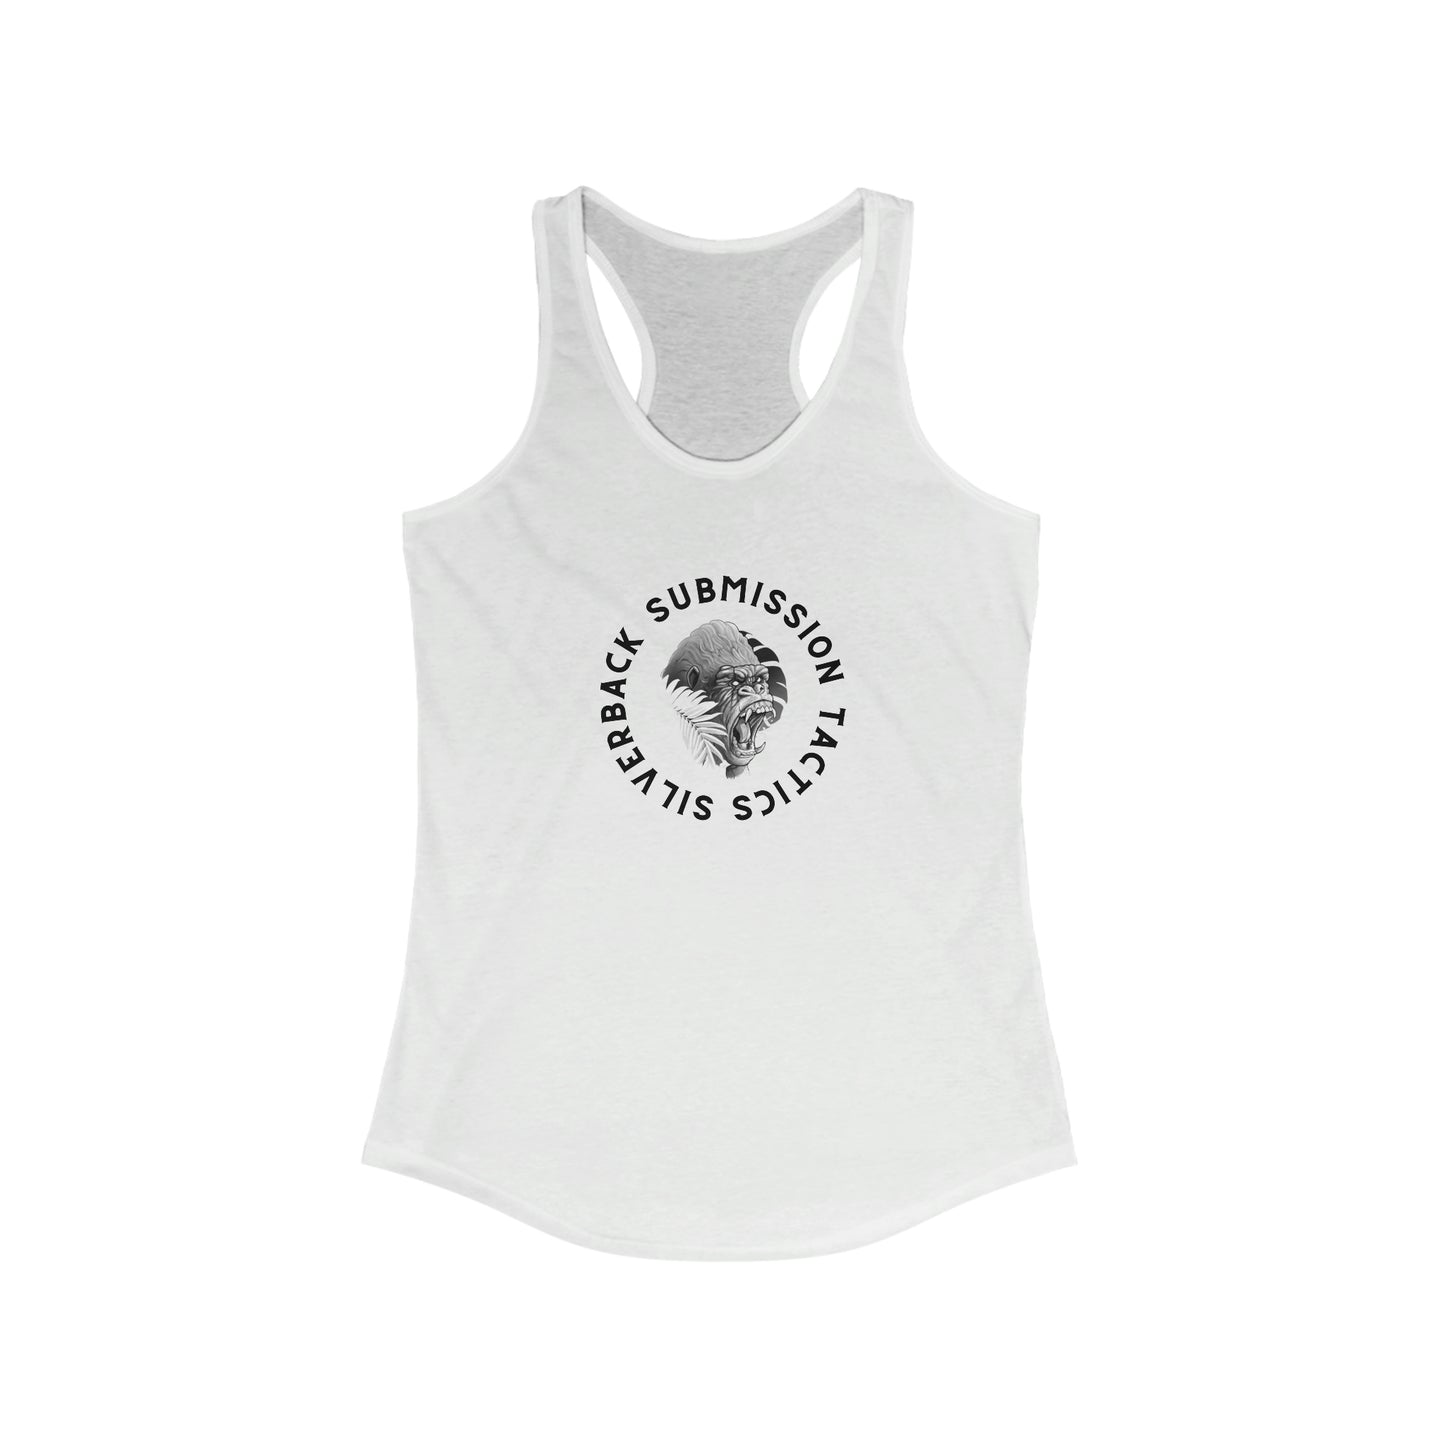 Women's Silverback Submission Tactics Ideal Racerback Tank